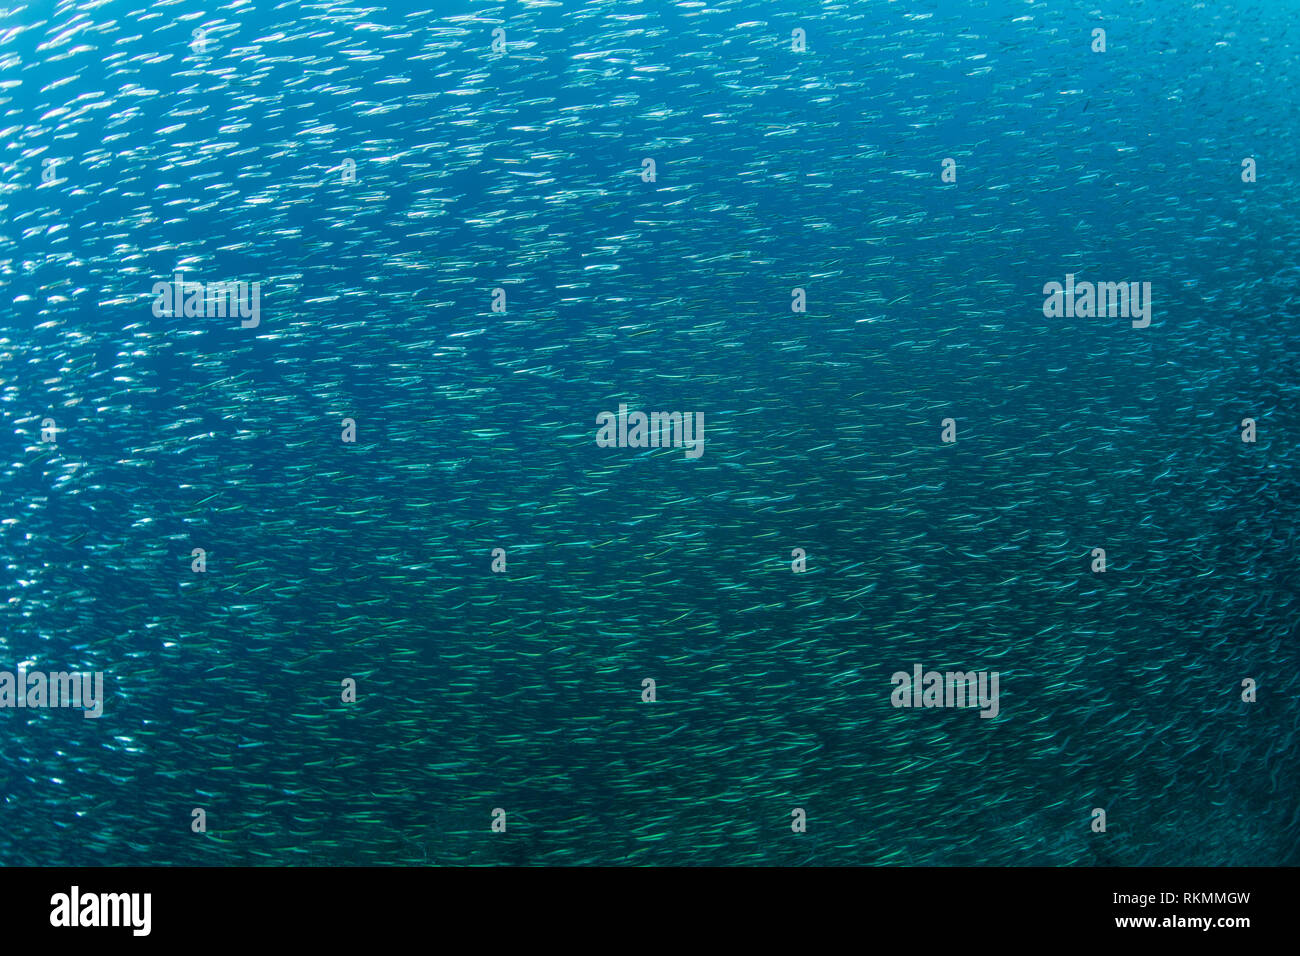 A large school of silversides swims just off the edge of a coral reef in Raja Ampat, Indonesia. These small, silvery fish often end up as prey. Stock Photo